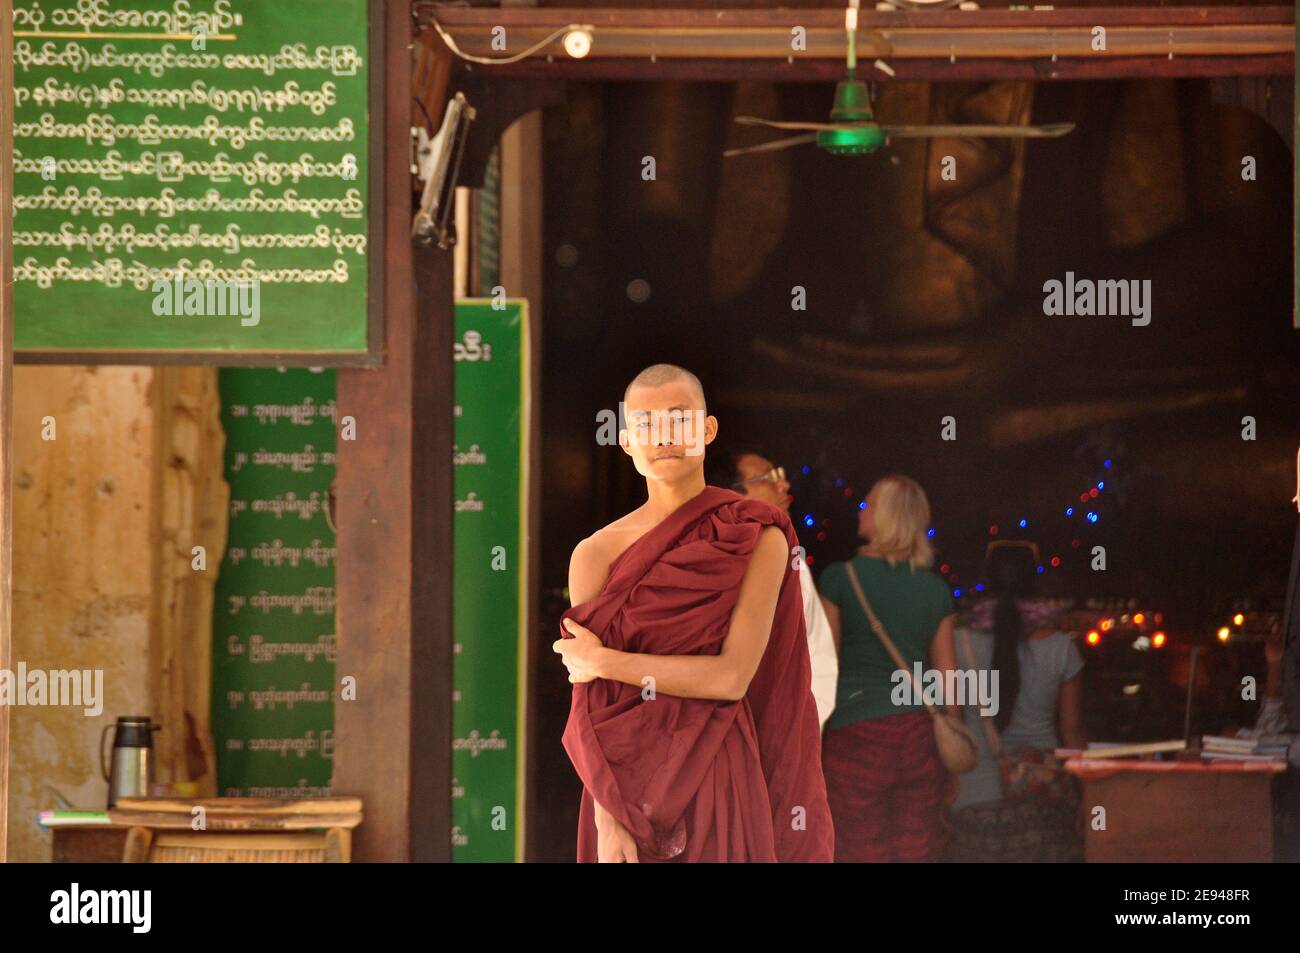 BAGAN, MYANMAR - NOV 13, 2015: Ethnic monk portrait. Young Asian man in robe of monk standing in front of temple entrance. Mingalazedi pagoda. Sulaman Stock Photo